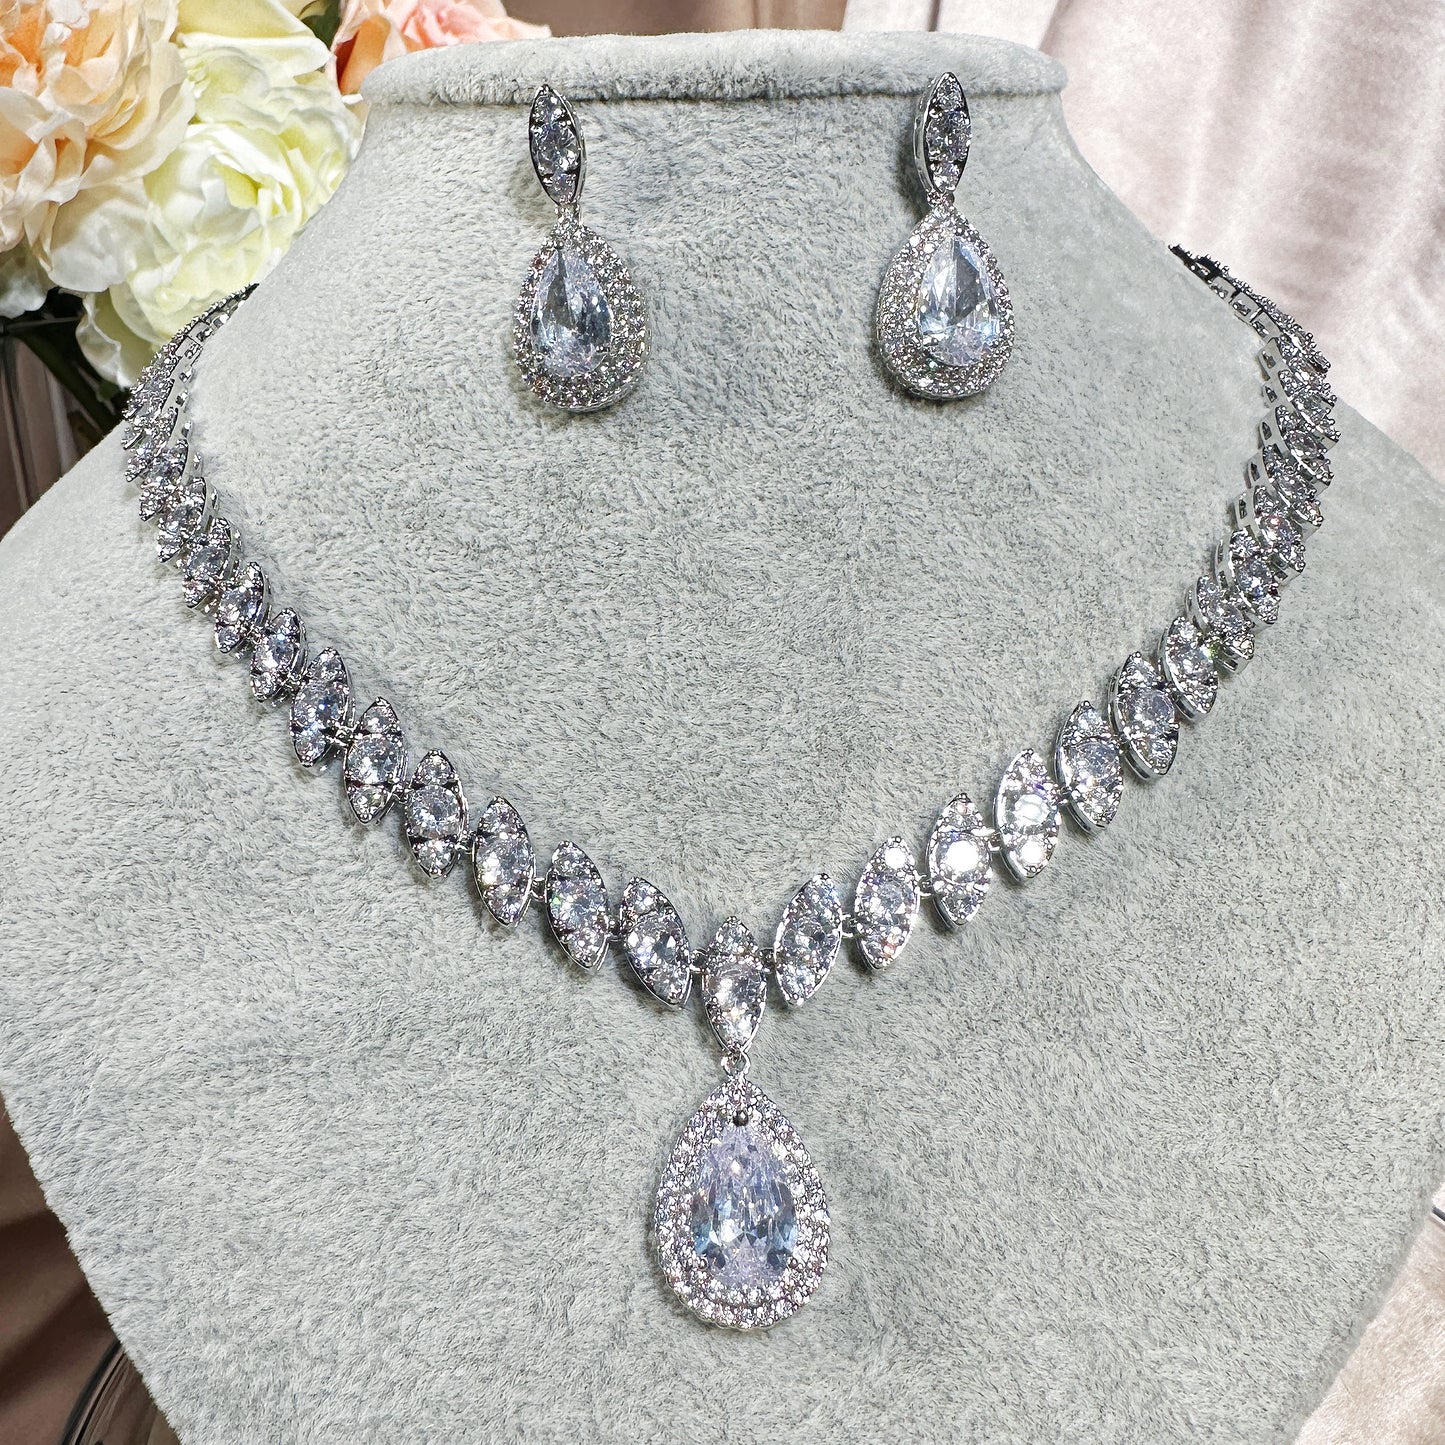 29022  Shine bright with our Pendant CZ Necklace and Earrings Set